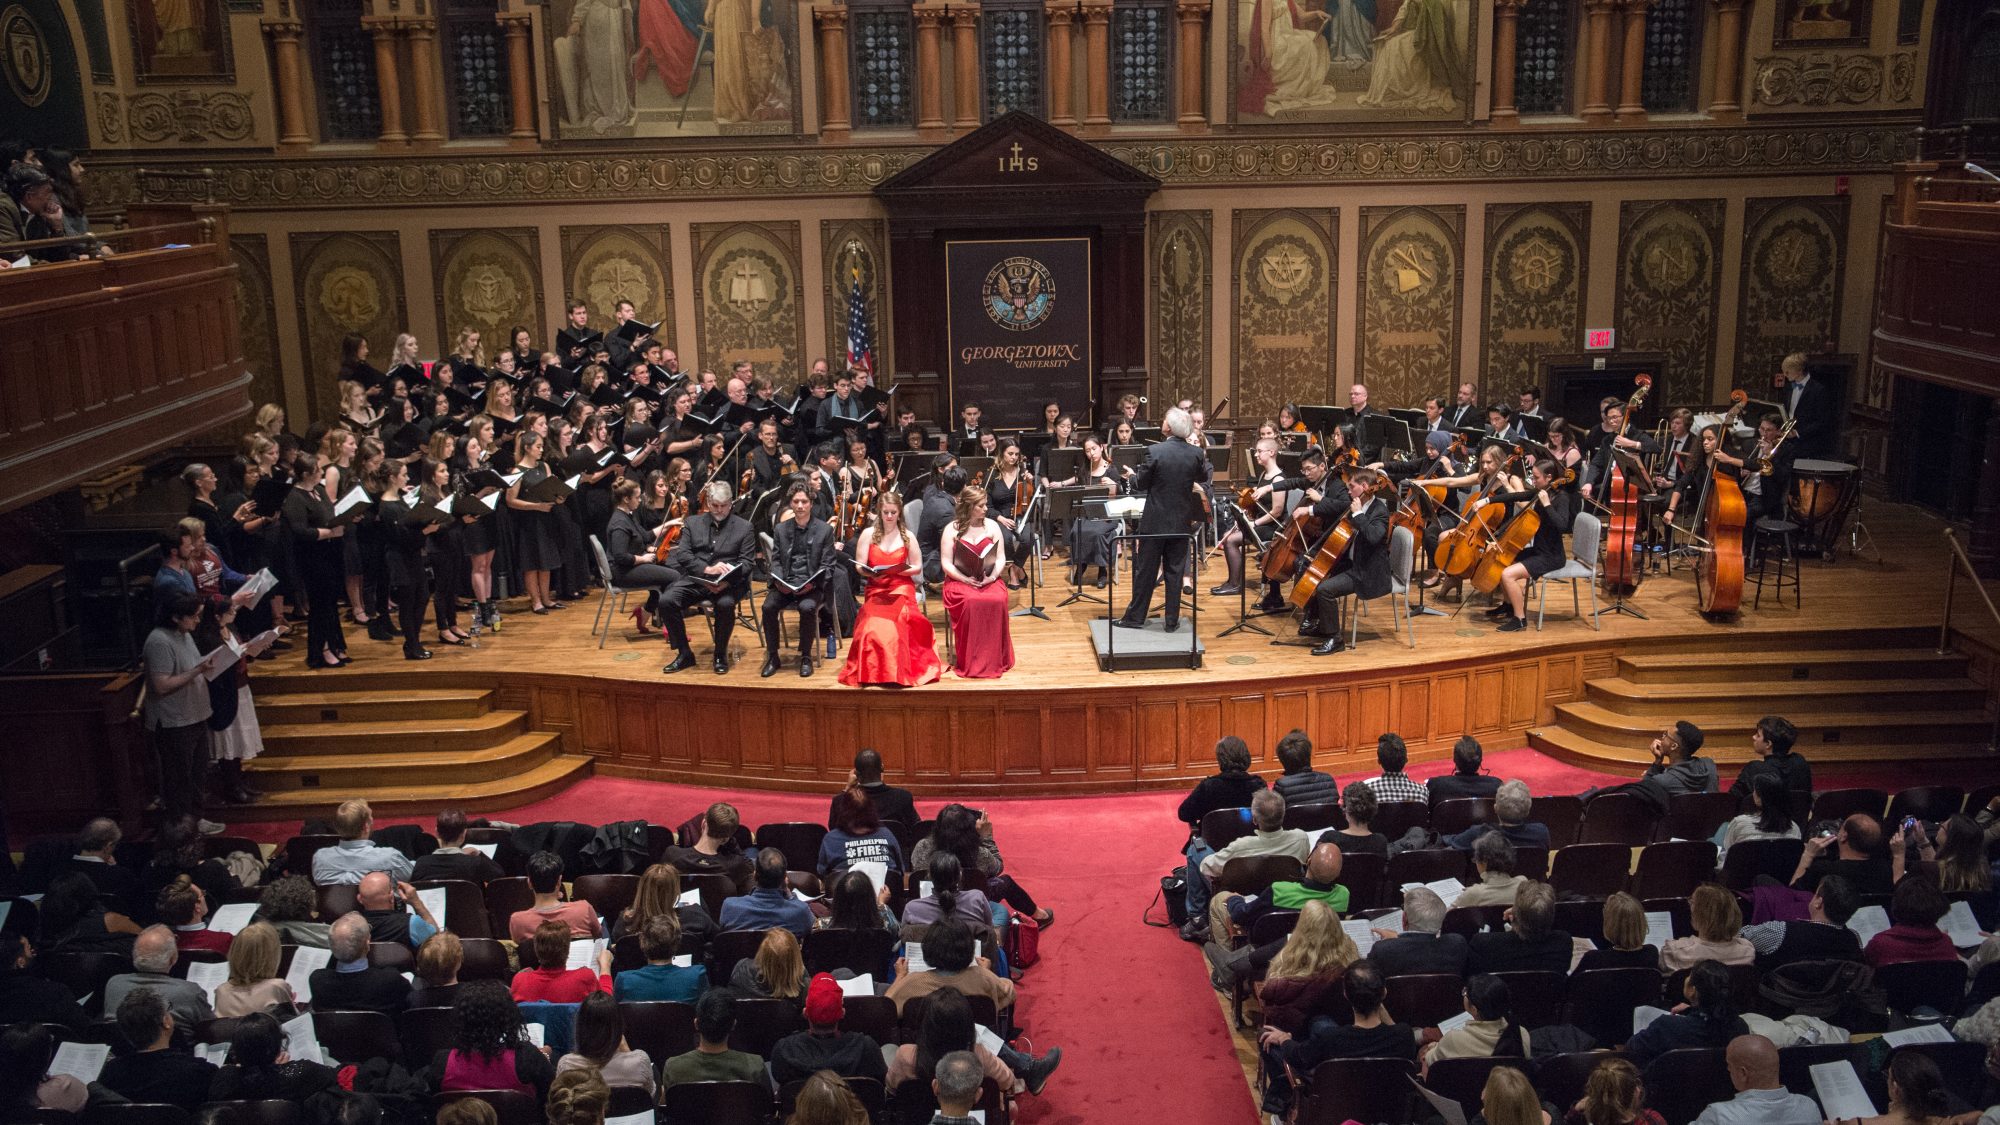 Members of the Georgetown University Orchestra and the GU Concert Choir perform together onstage in a packed Gaston Hall.